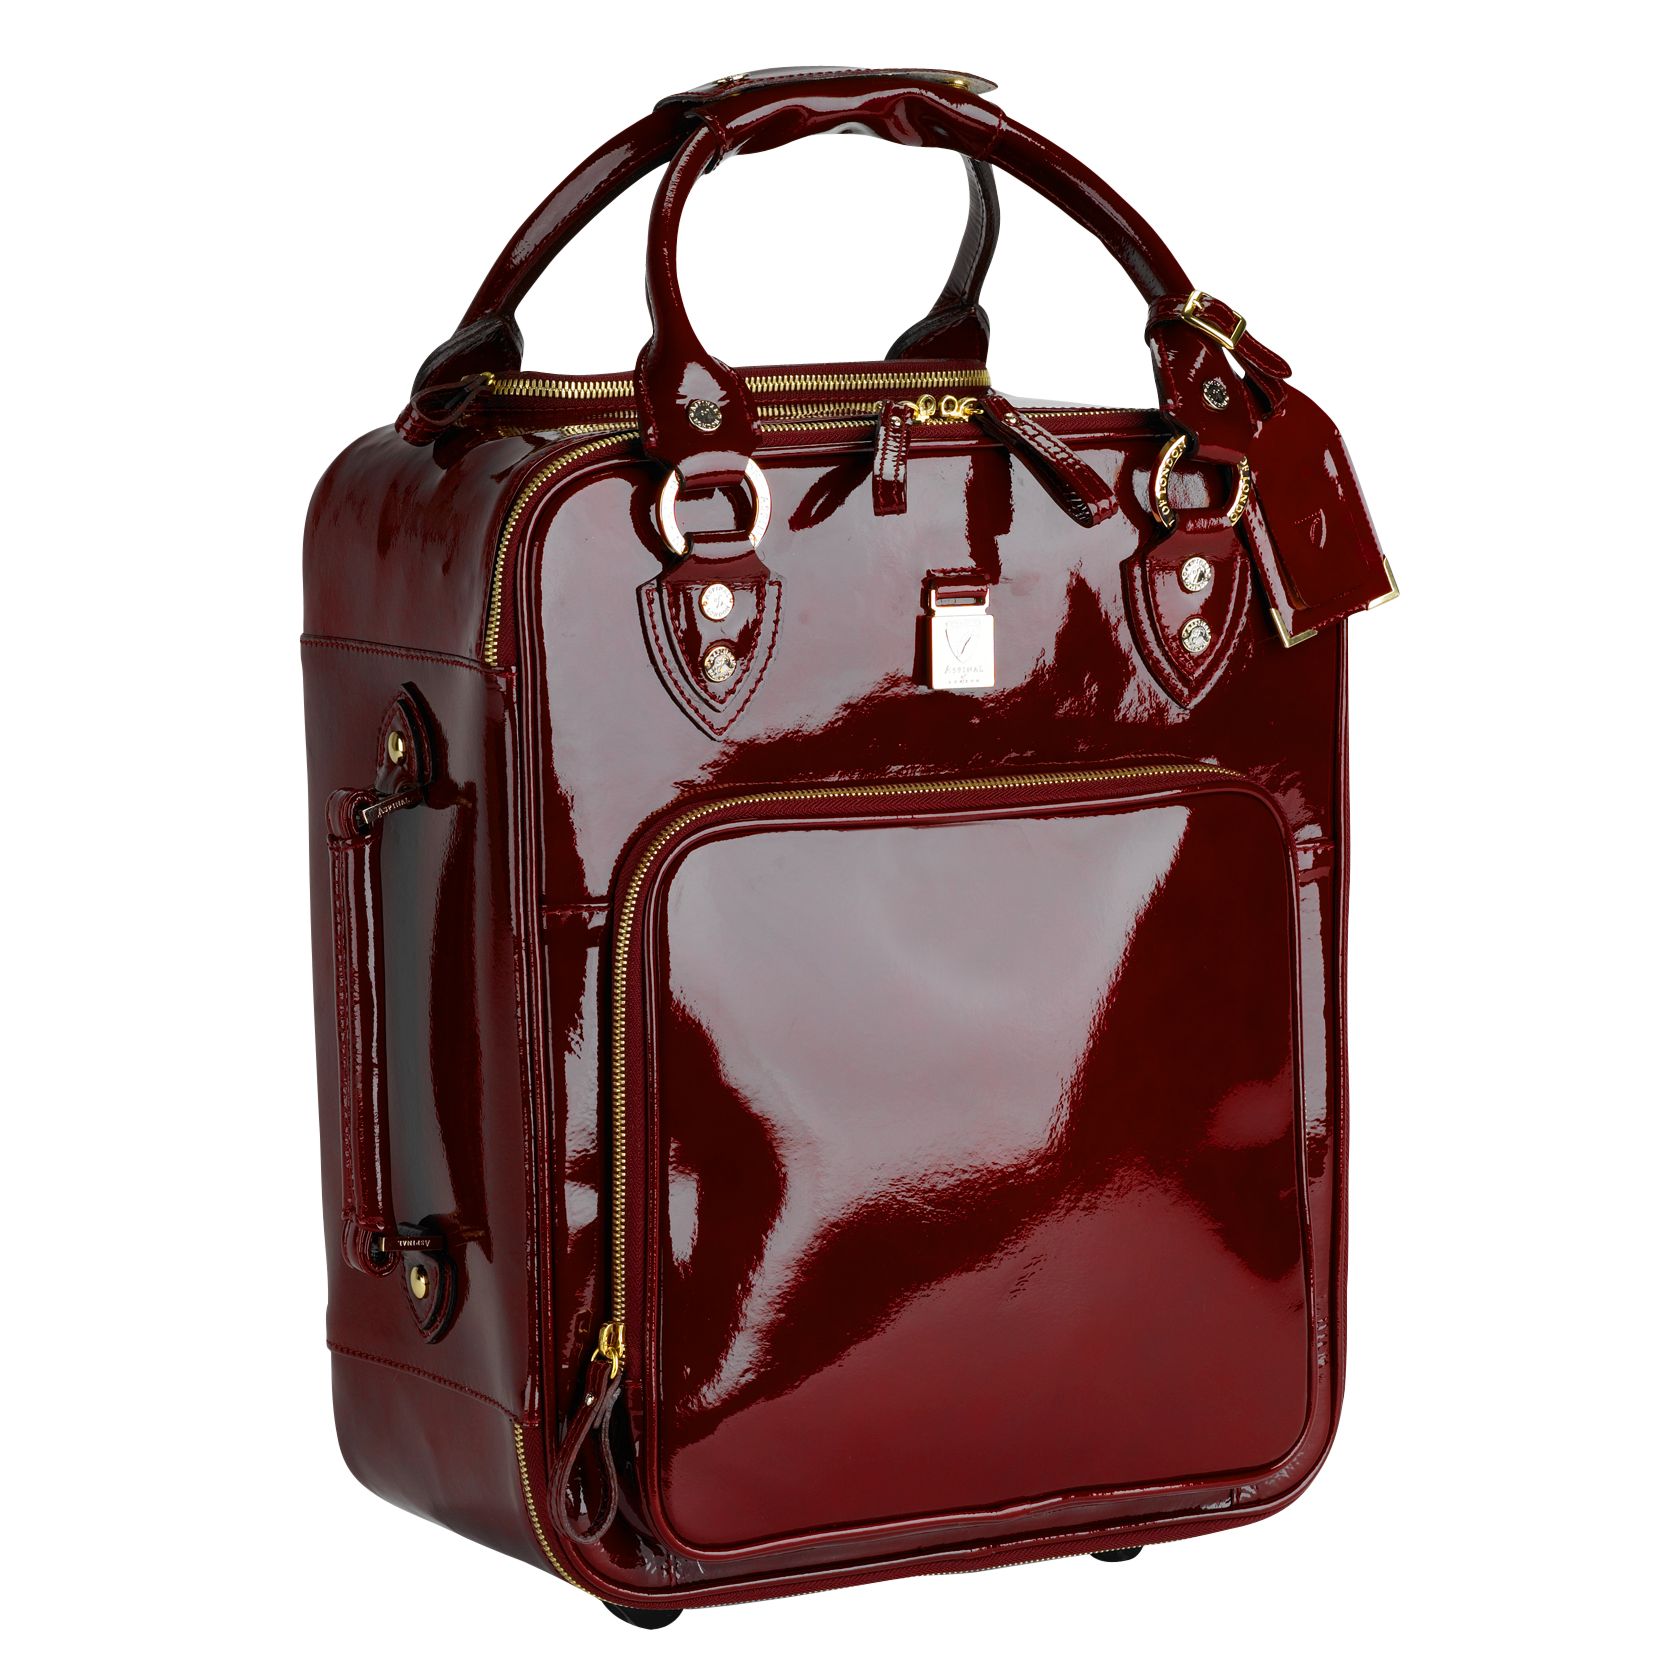 Aspinal Candy Travel Suitcase, Red at John Lewis